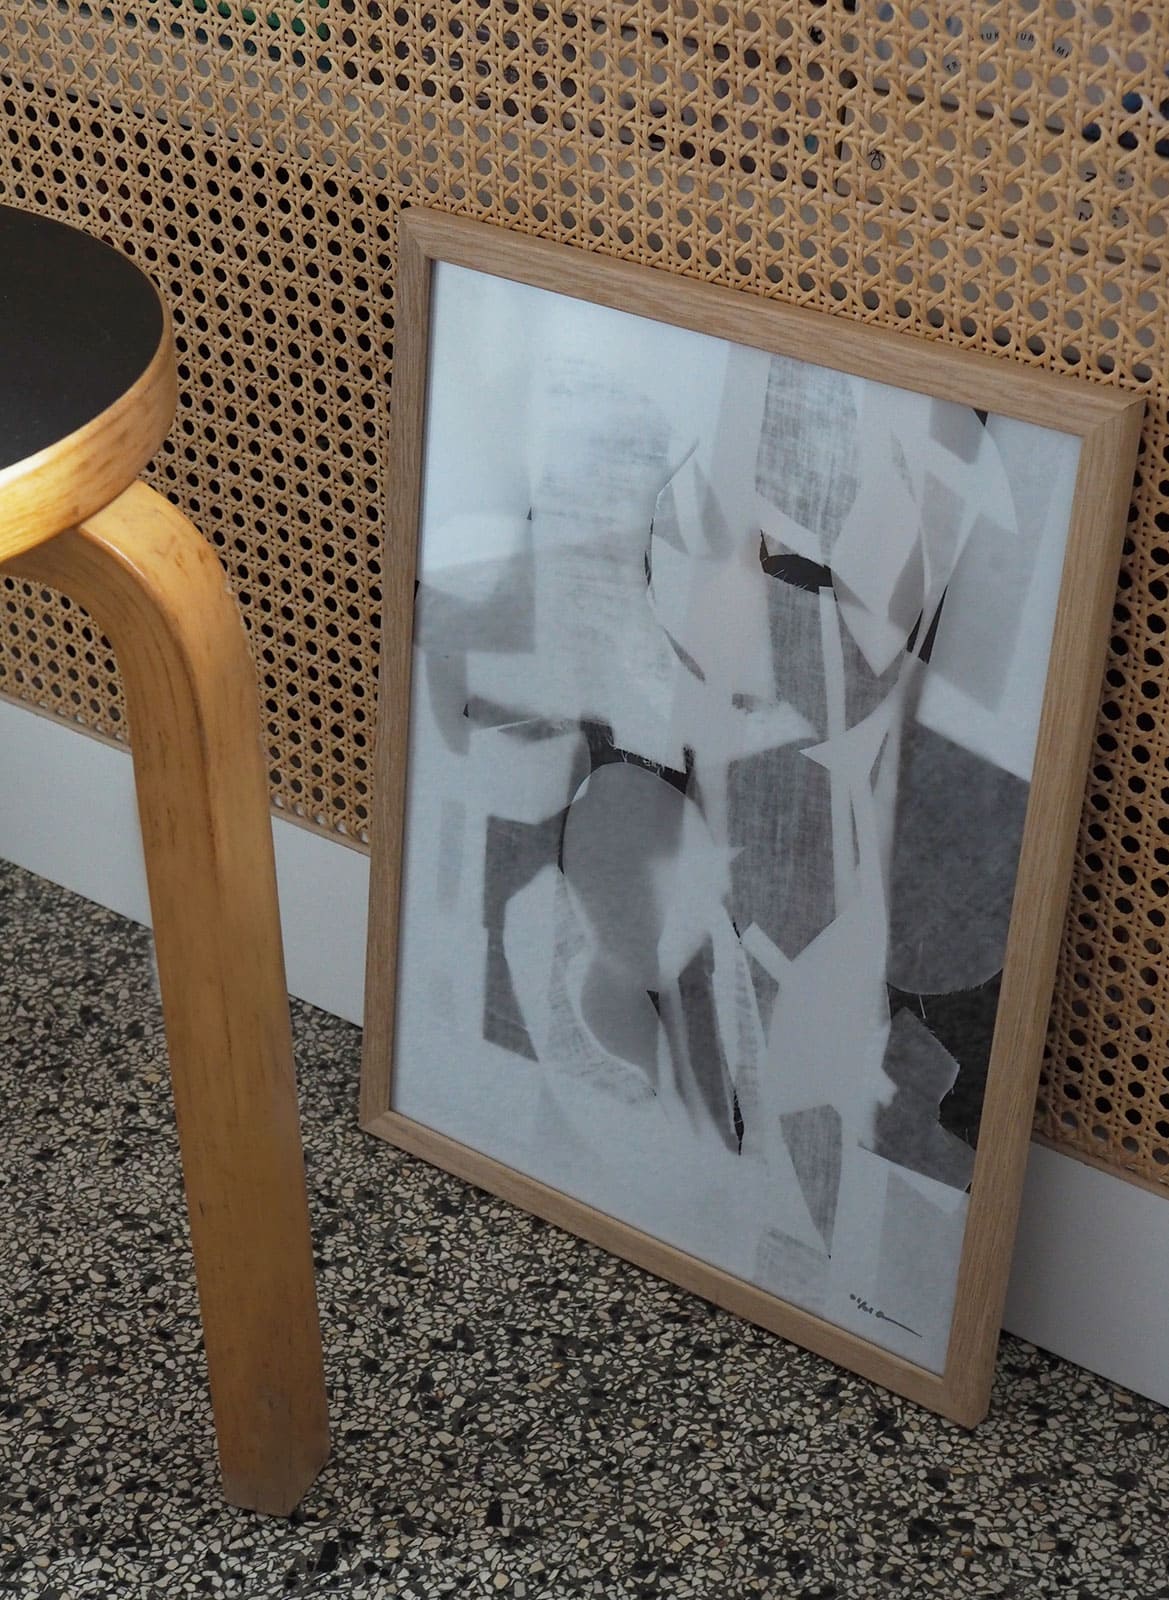 a black and white photogram showing an image of abstract shapes this is a limited edition by atelier cph